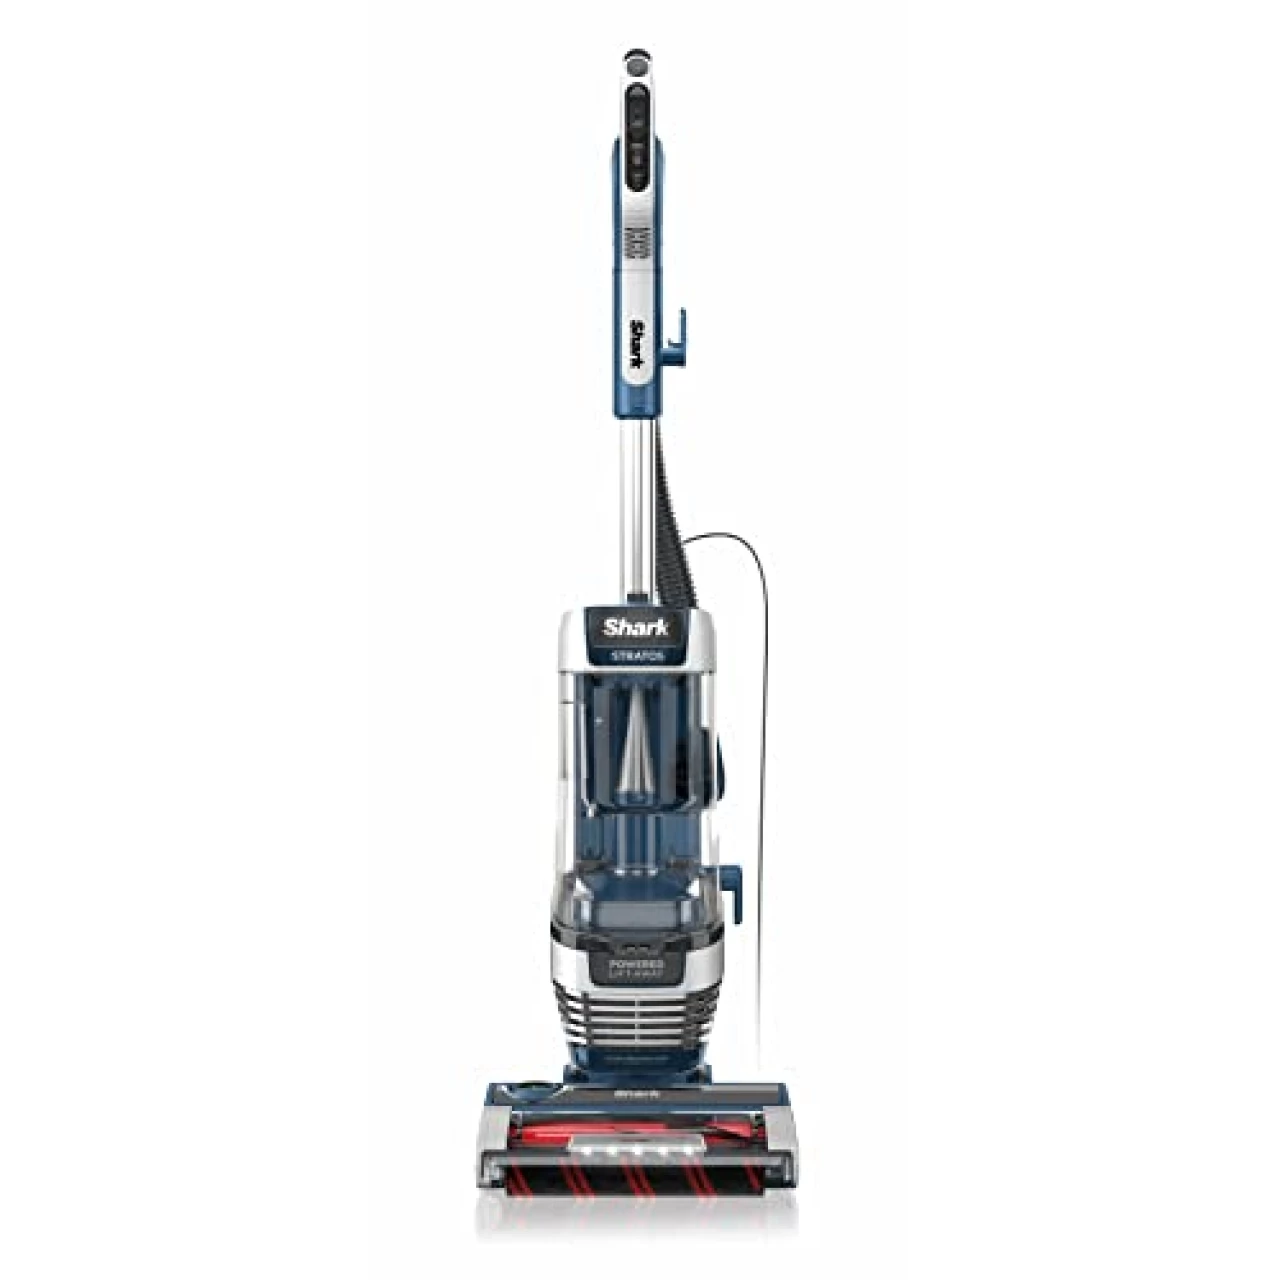 Shark AZ3002 Stratos Upright Vacuum with DuoClean PowerFins, HairPro, Powered Lift-Away, Self-Cleaning Brushroll, &amp; Odor Neutralizer Technology, Navy